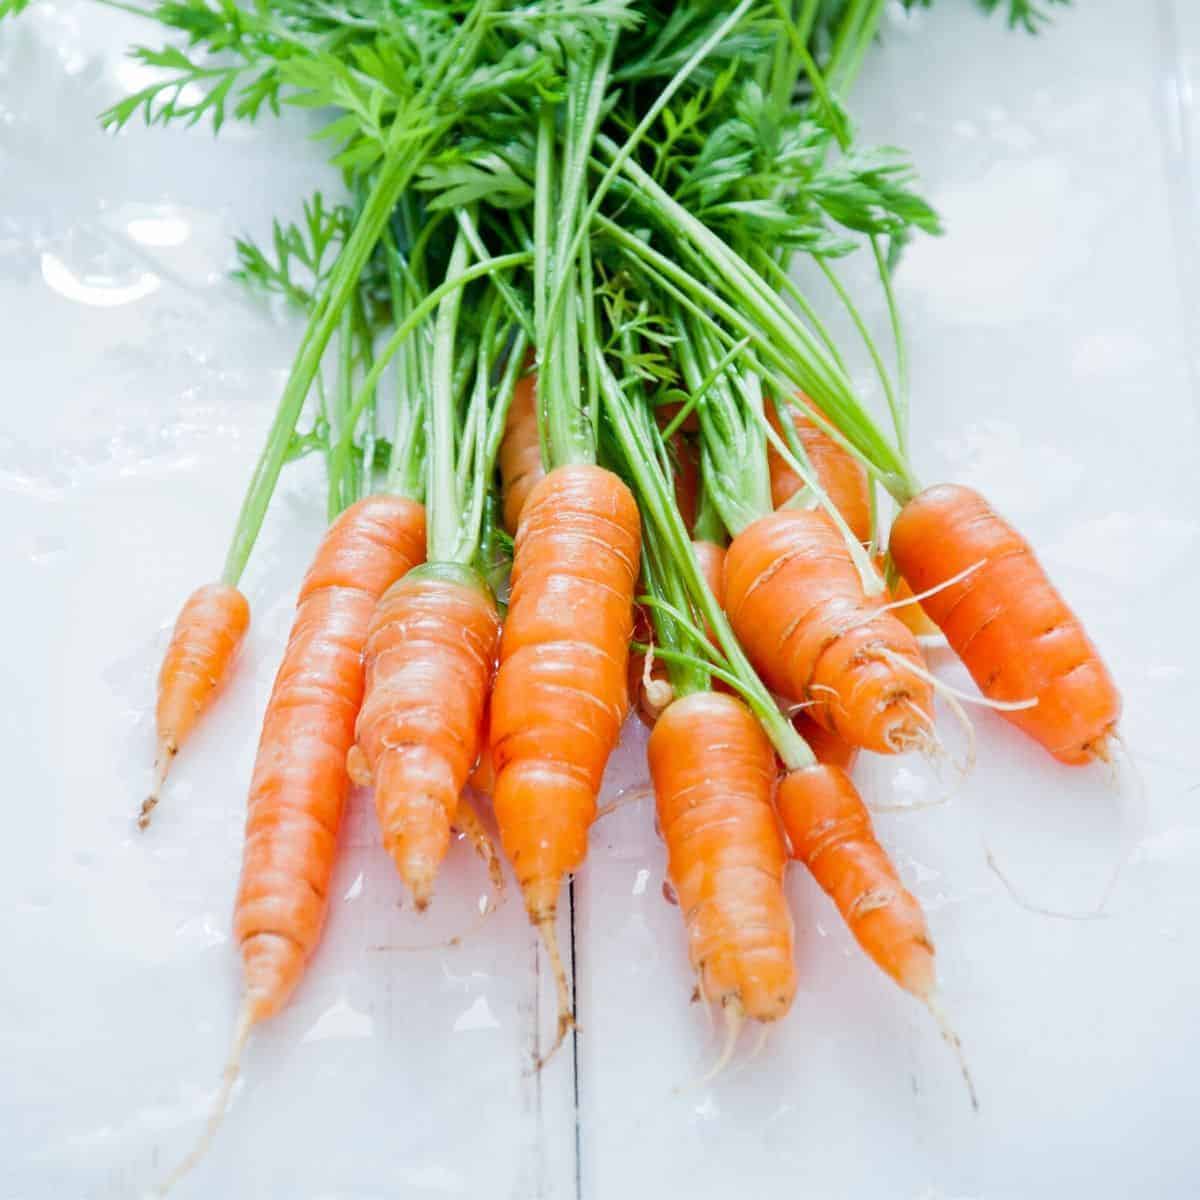 Can You Freeze Carrots? An Easy Way to Freeze Carrots